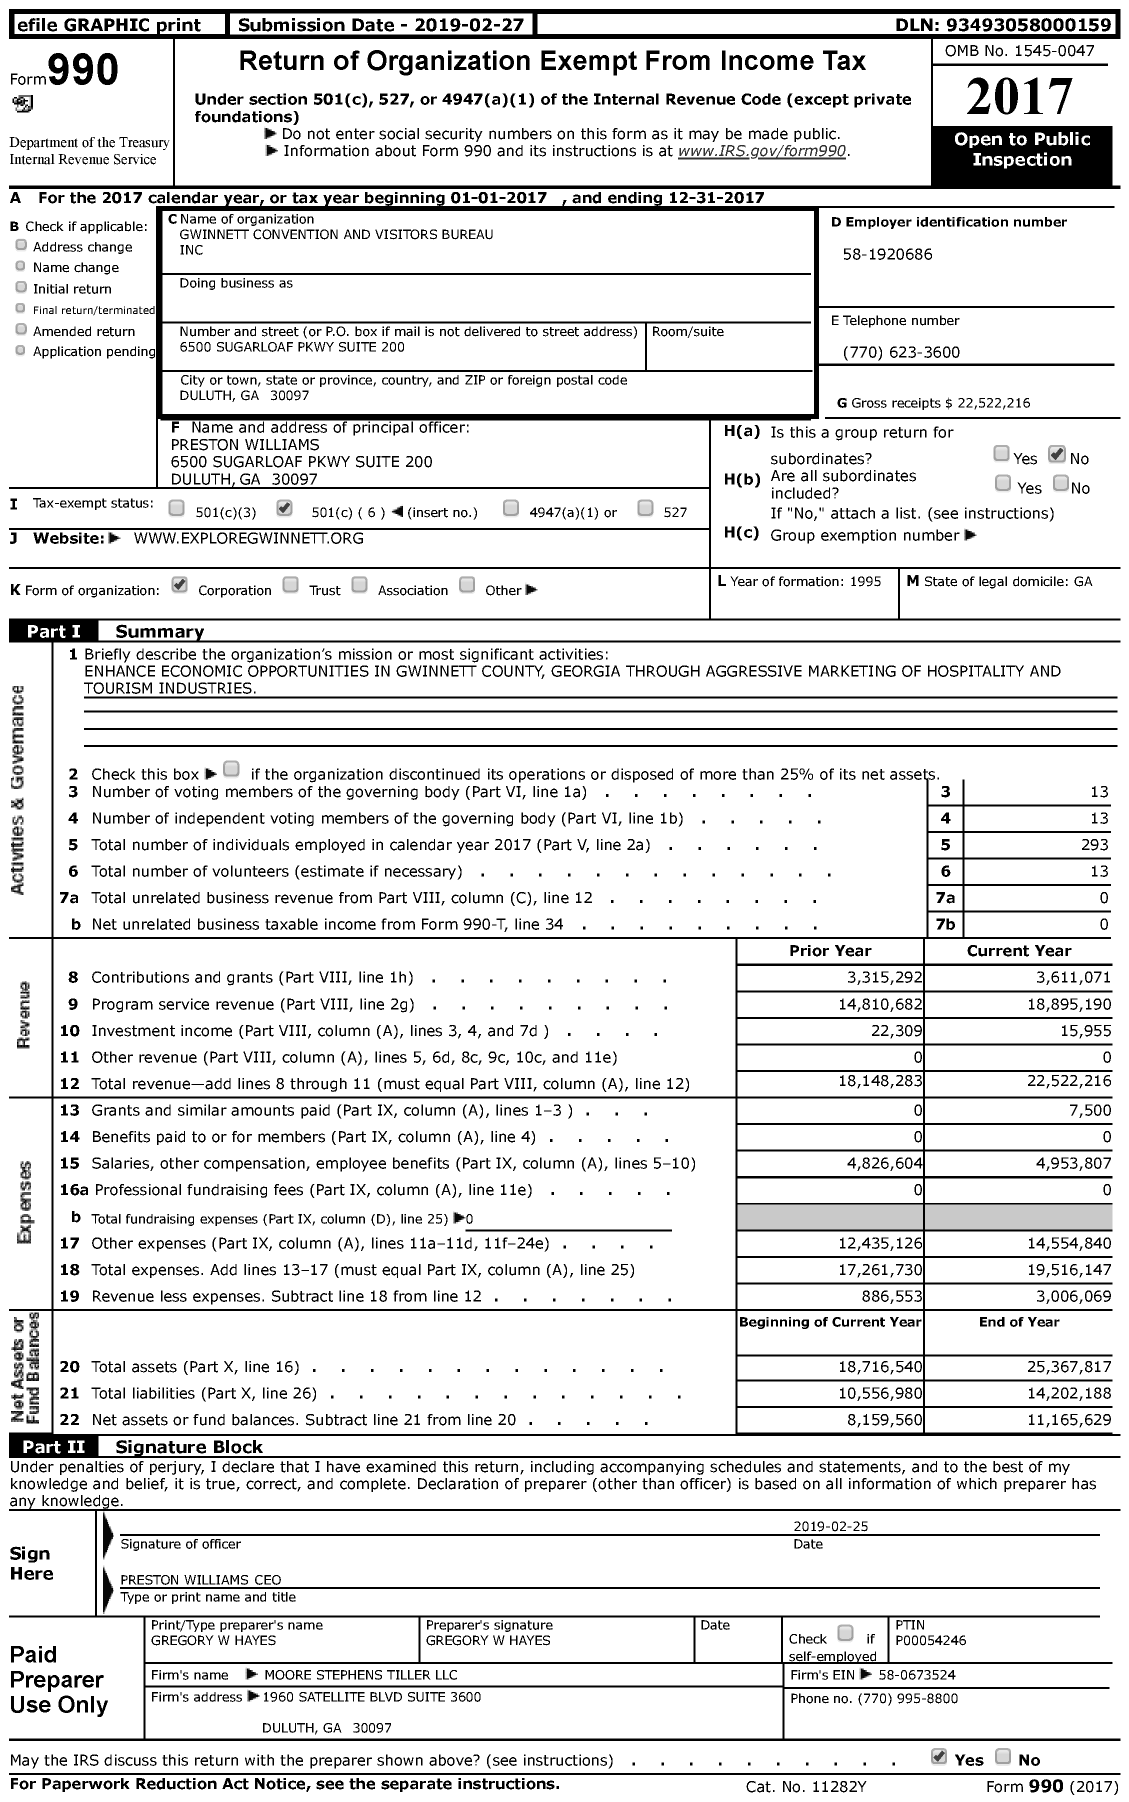 Image of first page of 2017 Form 990 for Gwinnett Convention and Visitors Bureau (GCVB)